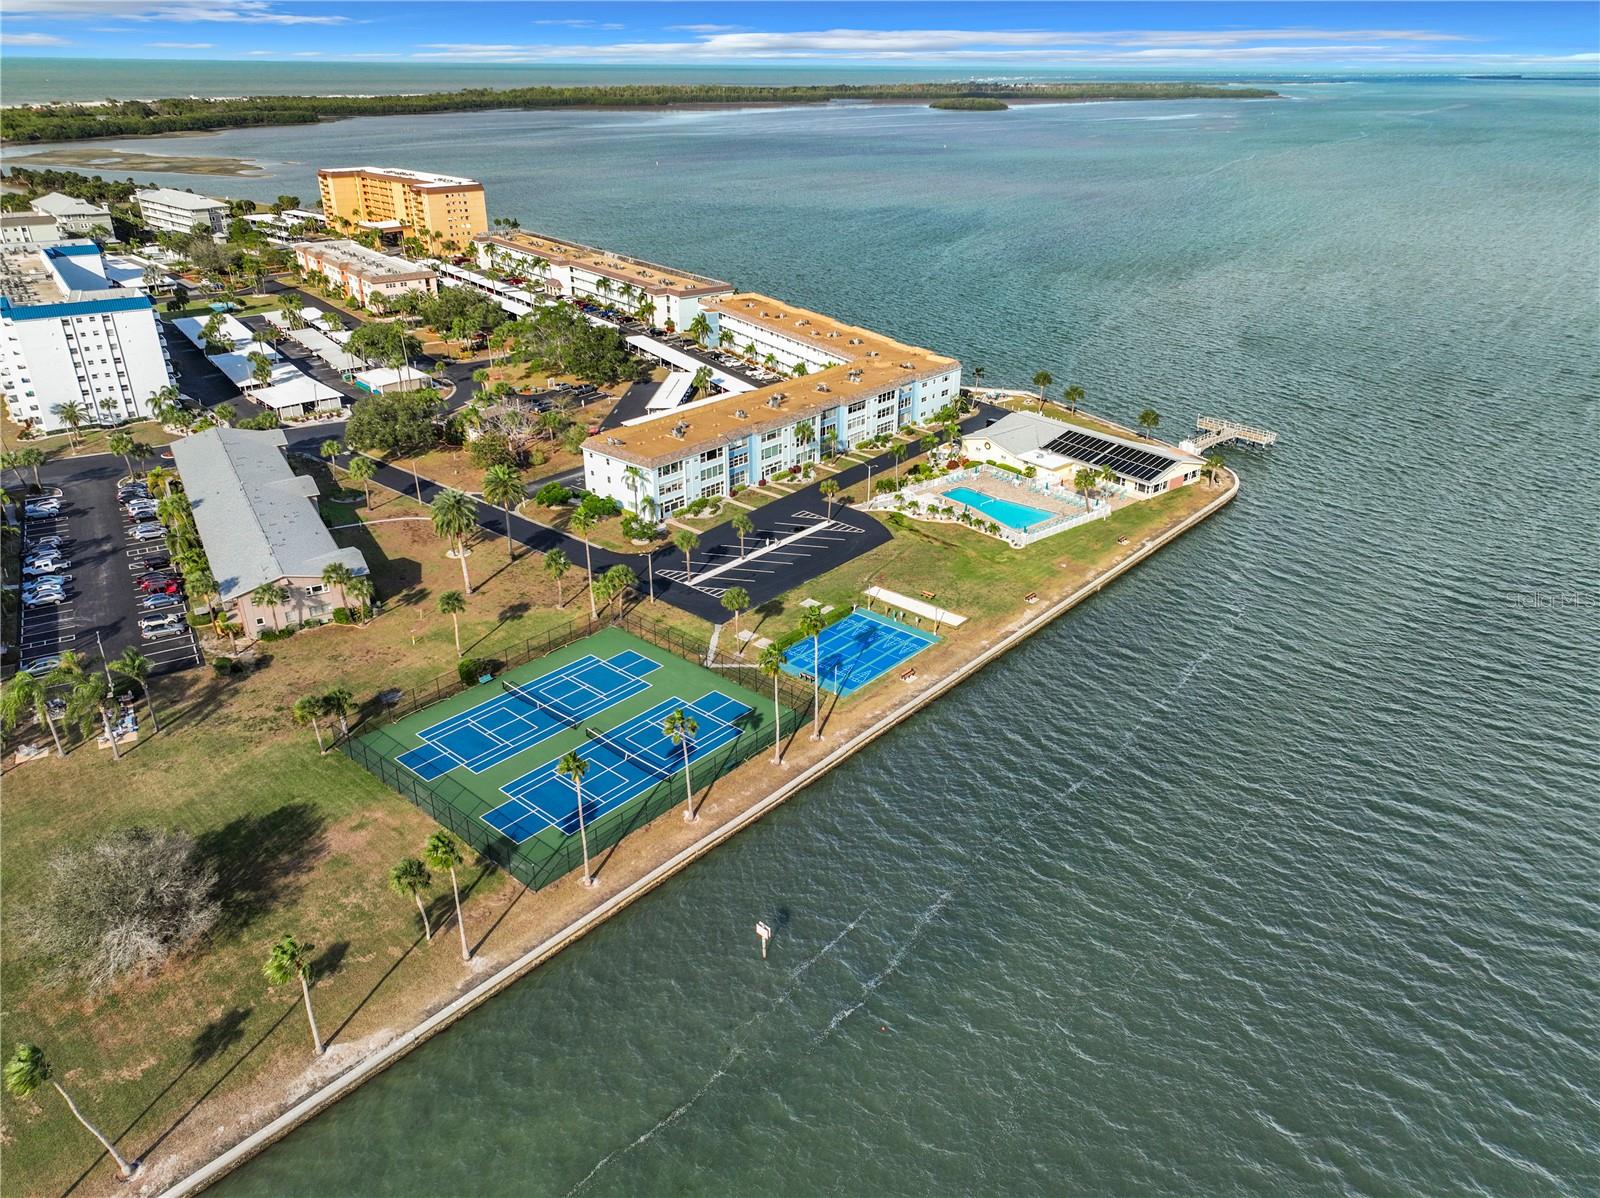 Aerial view with tennis, pickleball courts and pool